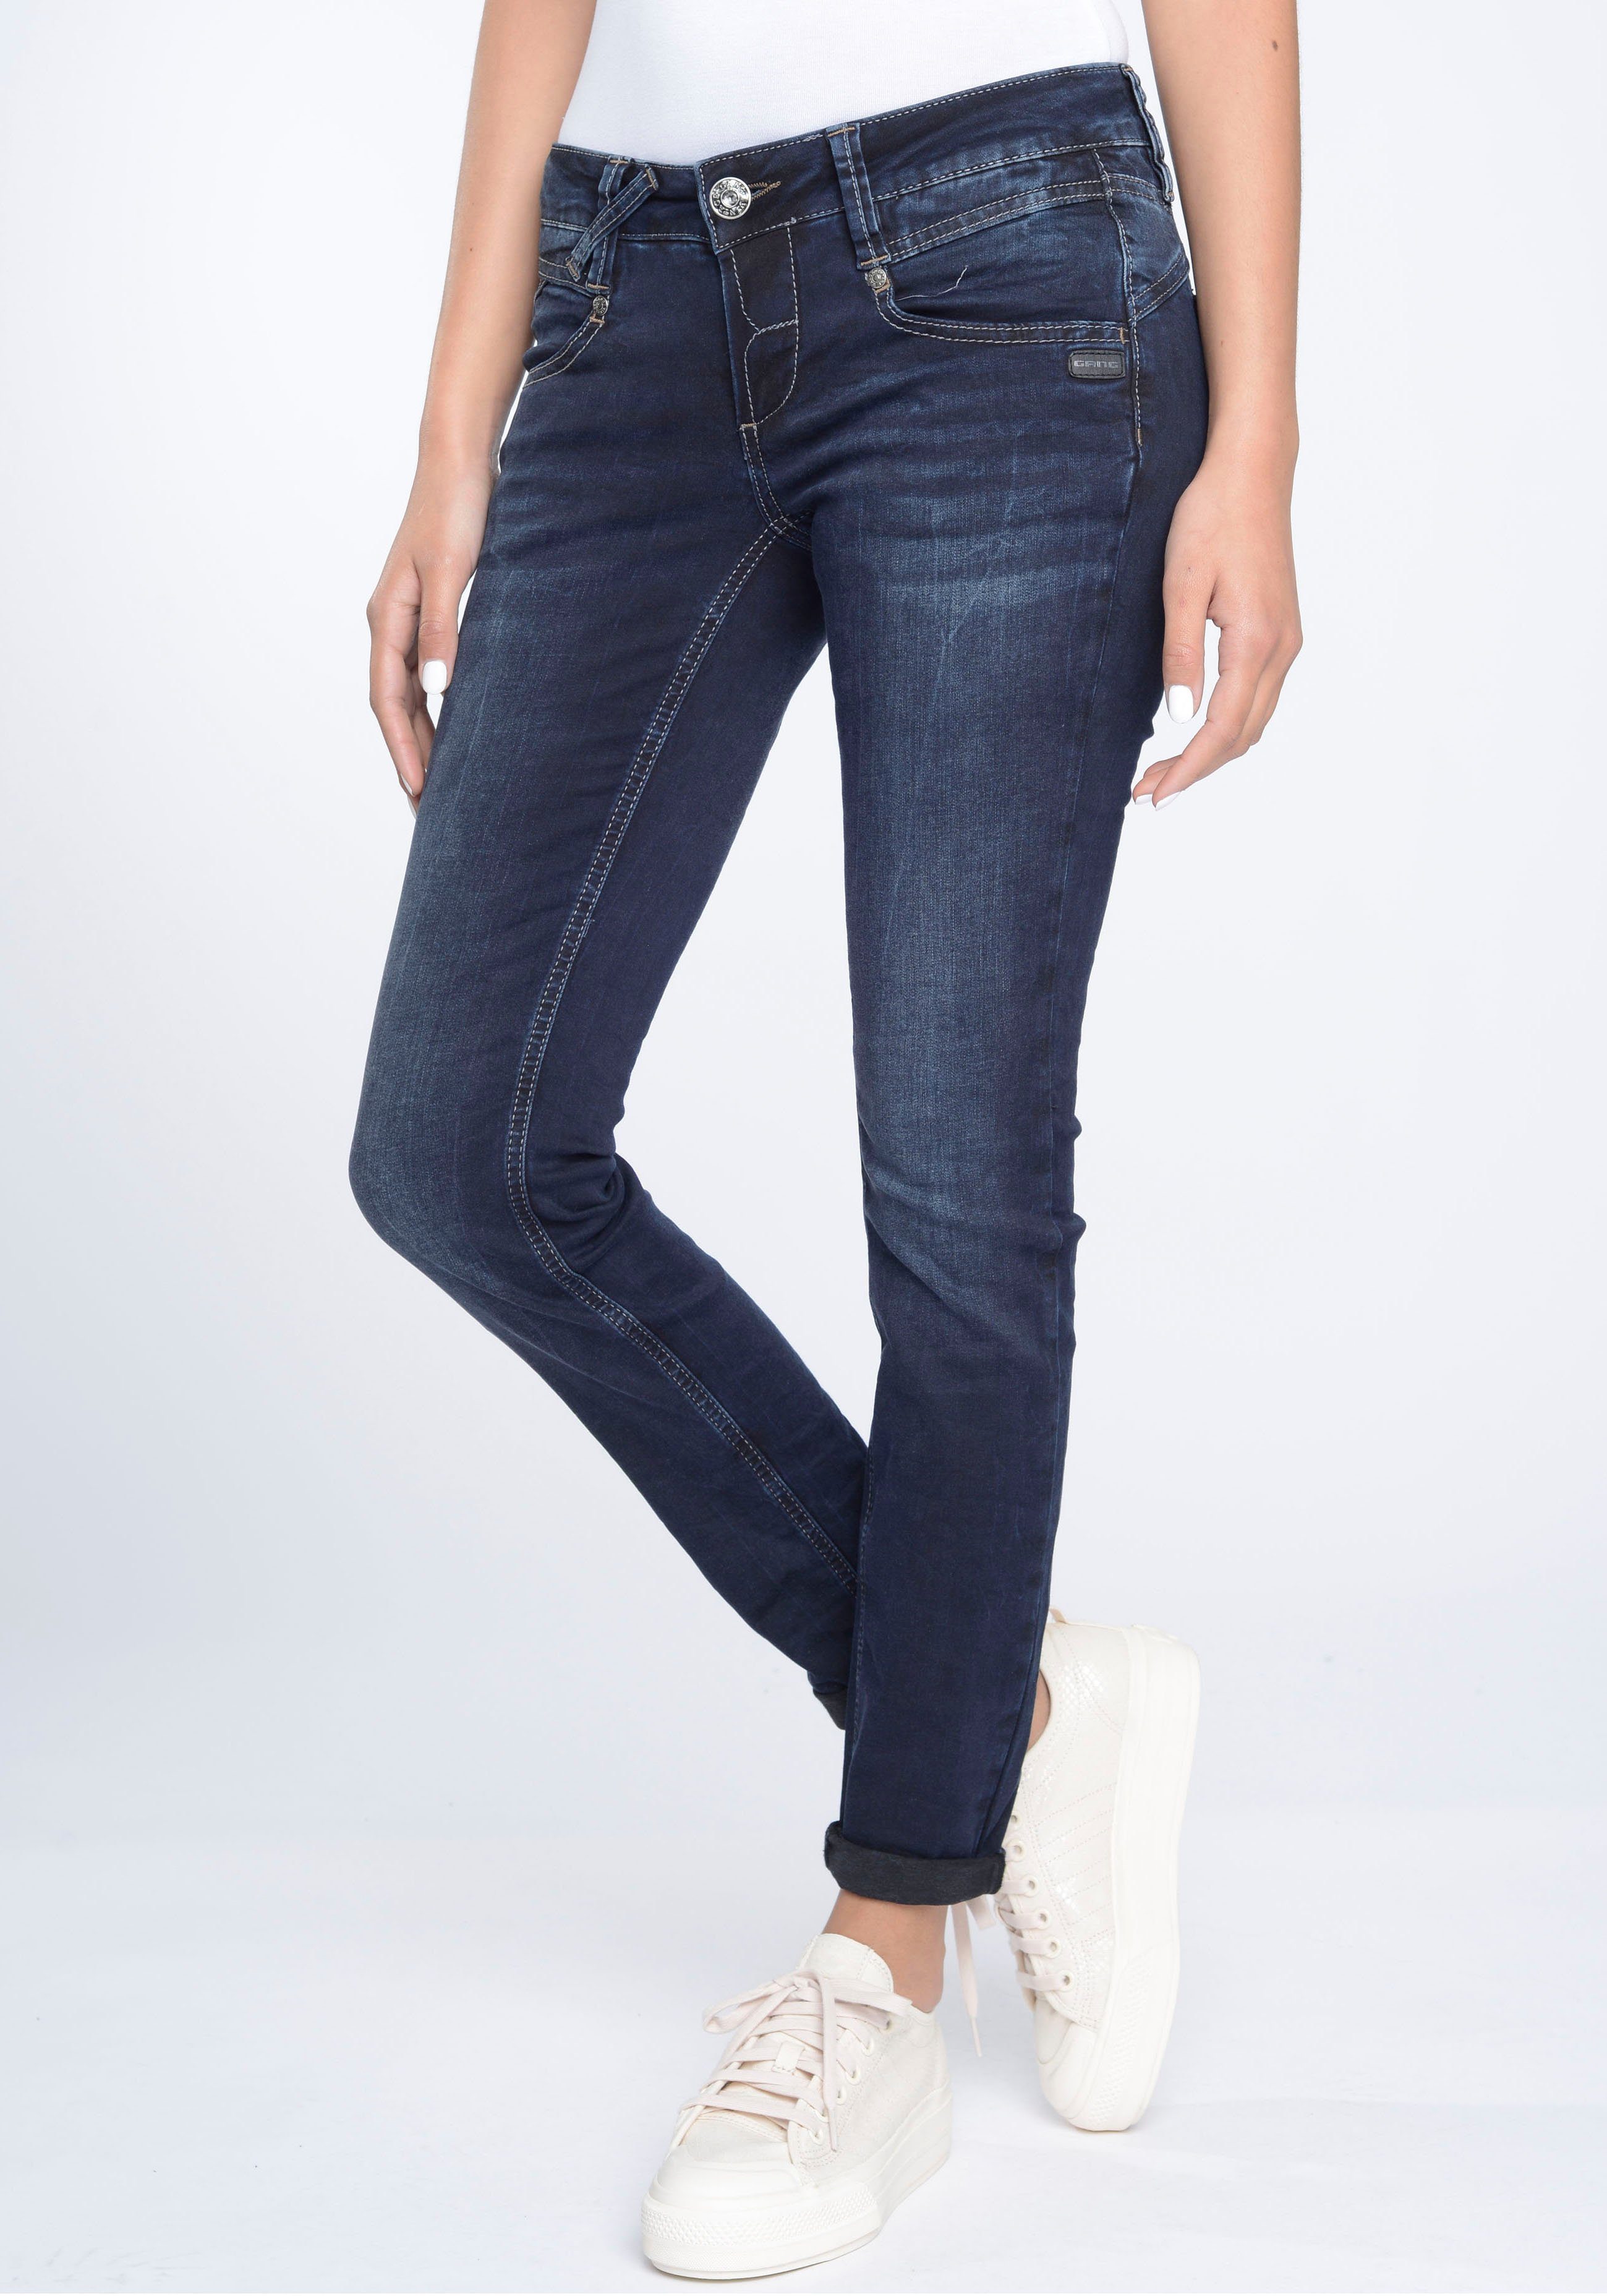 GANG Skinny-fit-Jeans 94Nena in authenischer Used-Waschung dark used